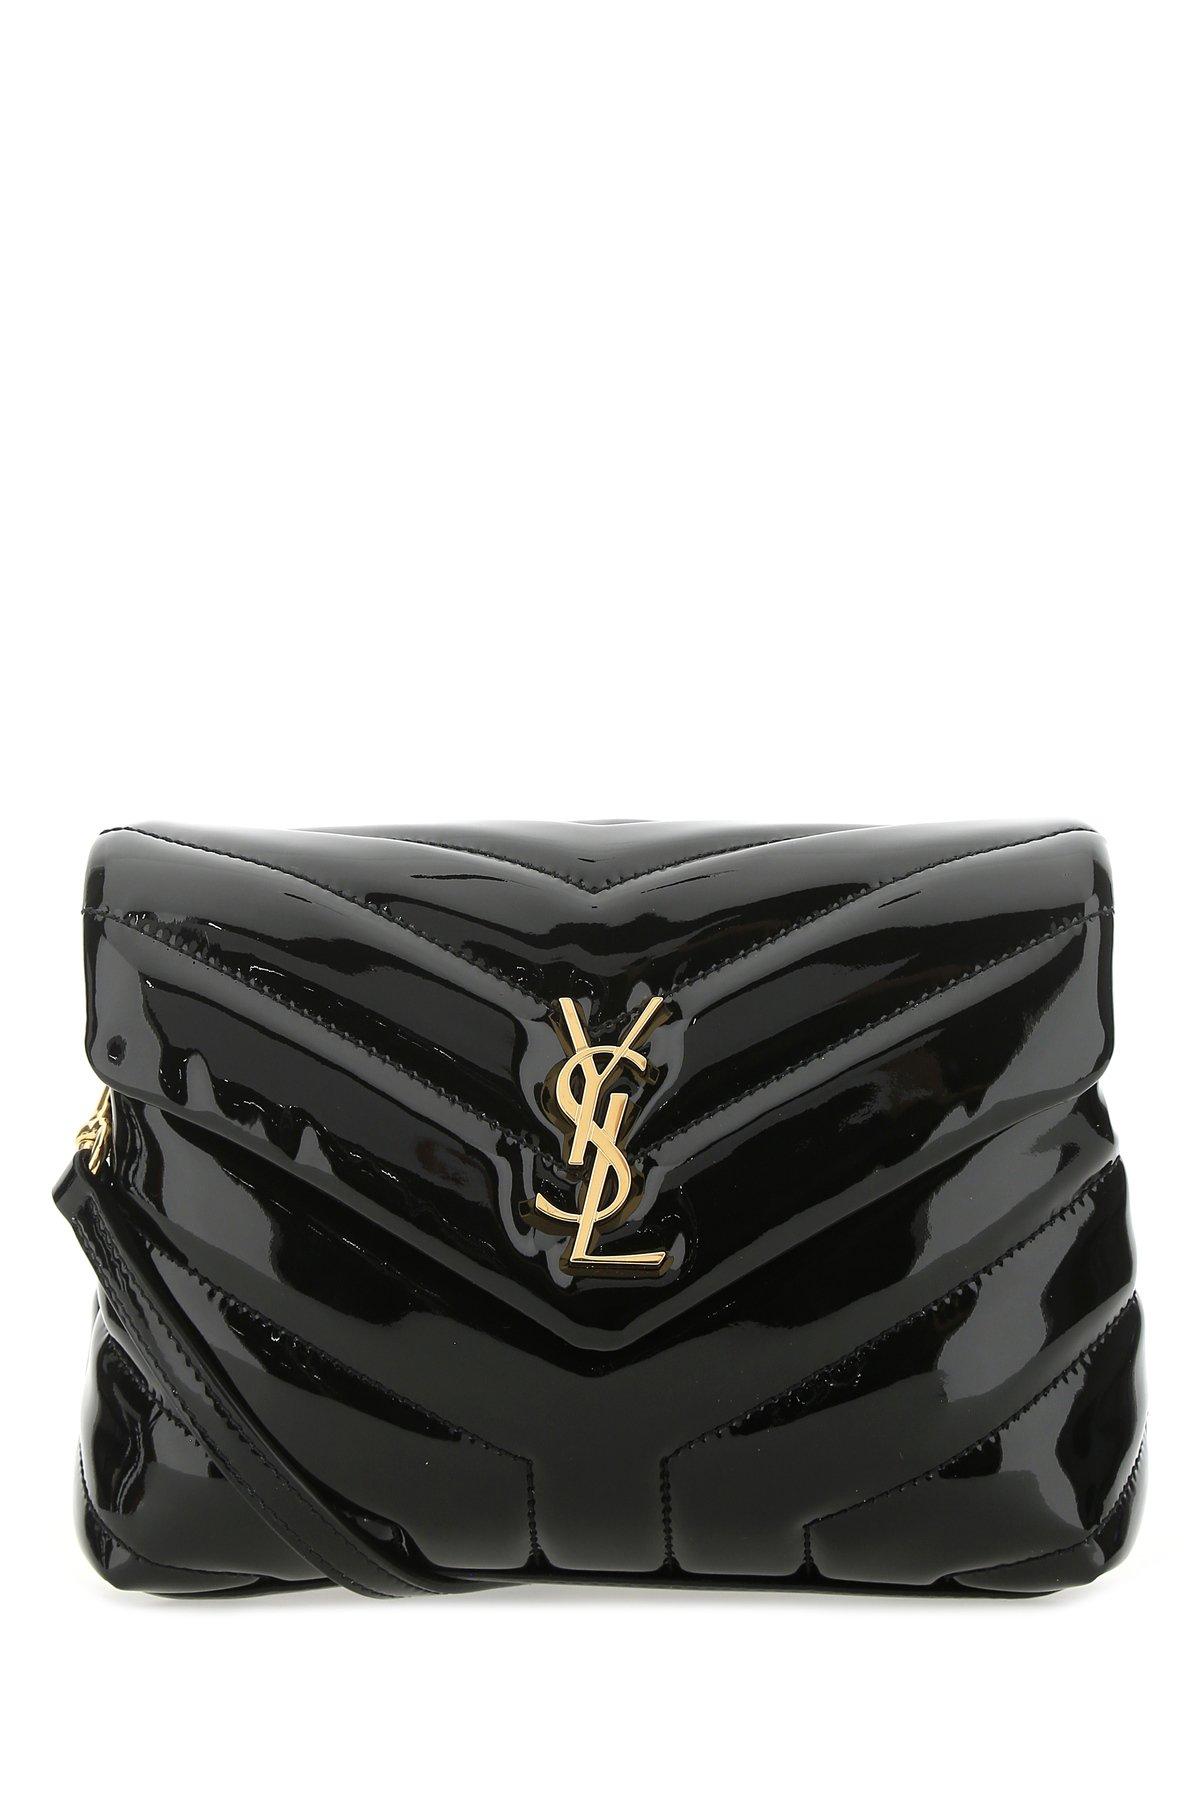 Saint Laurent Leather Women S Smlg in Black - Save 37% | Lyst